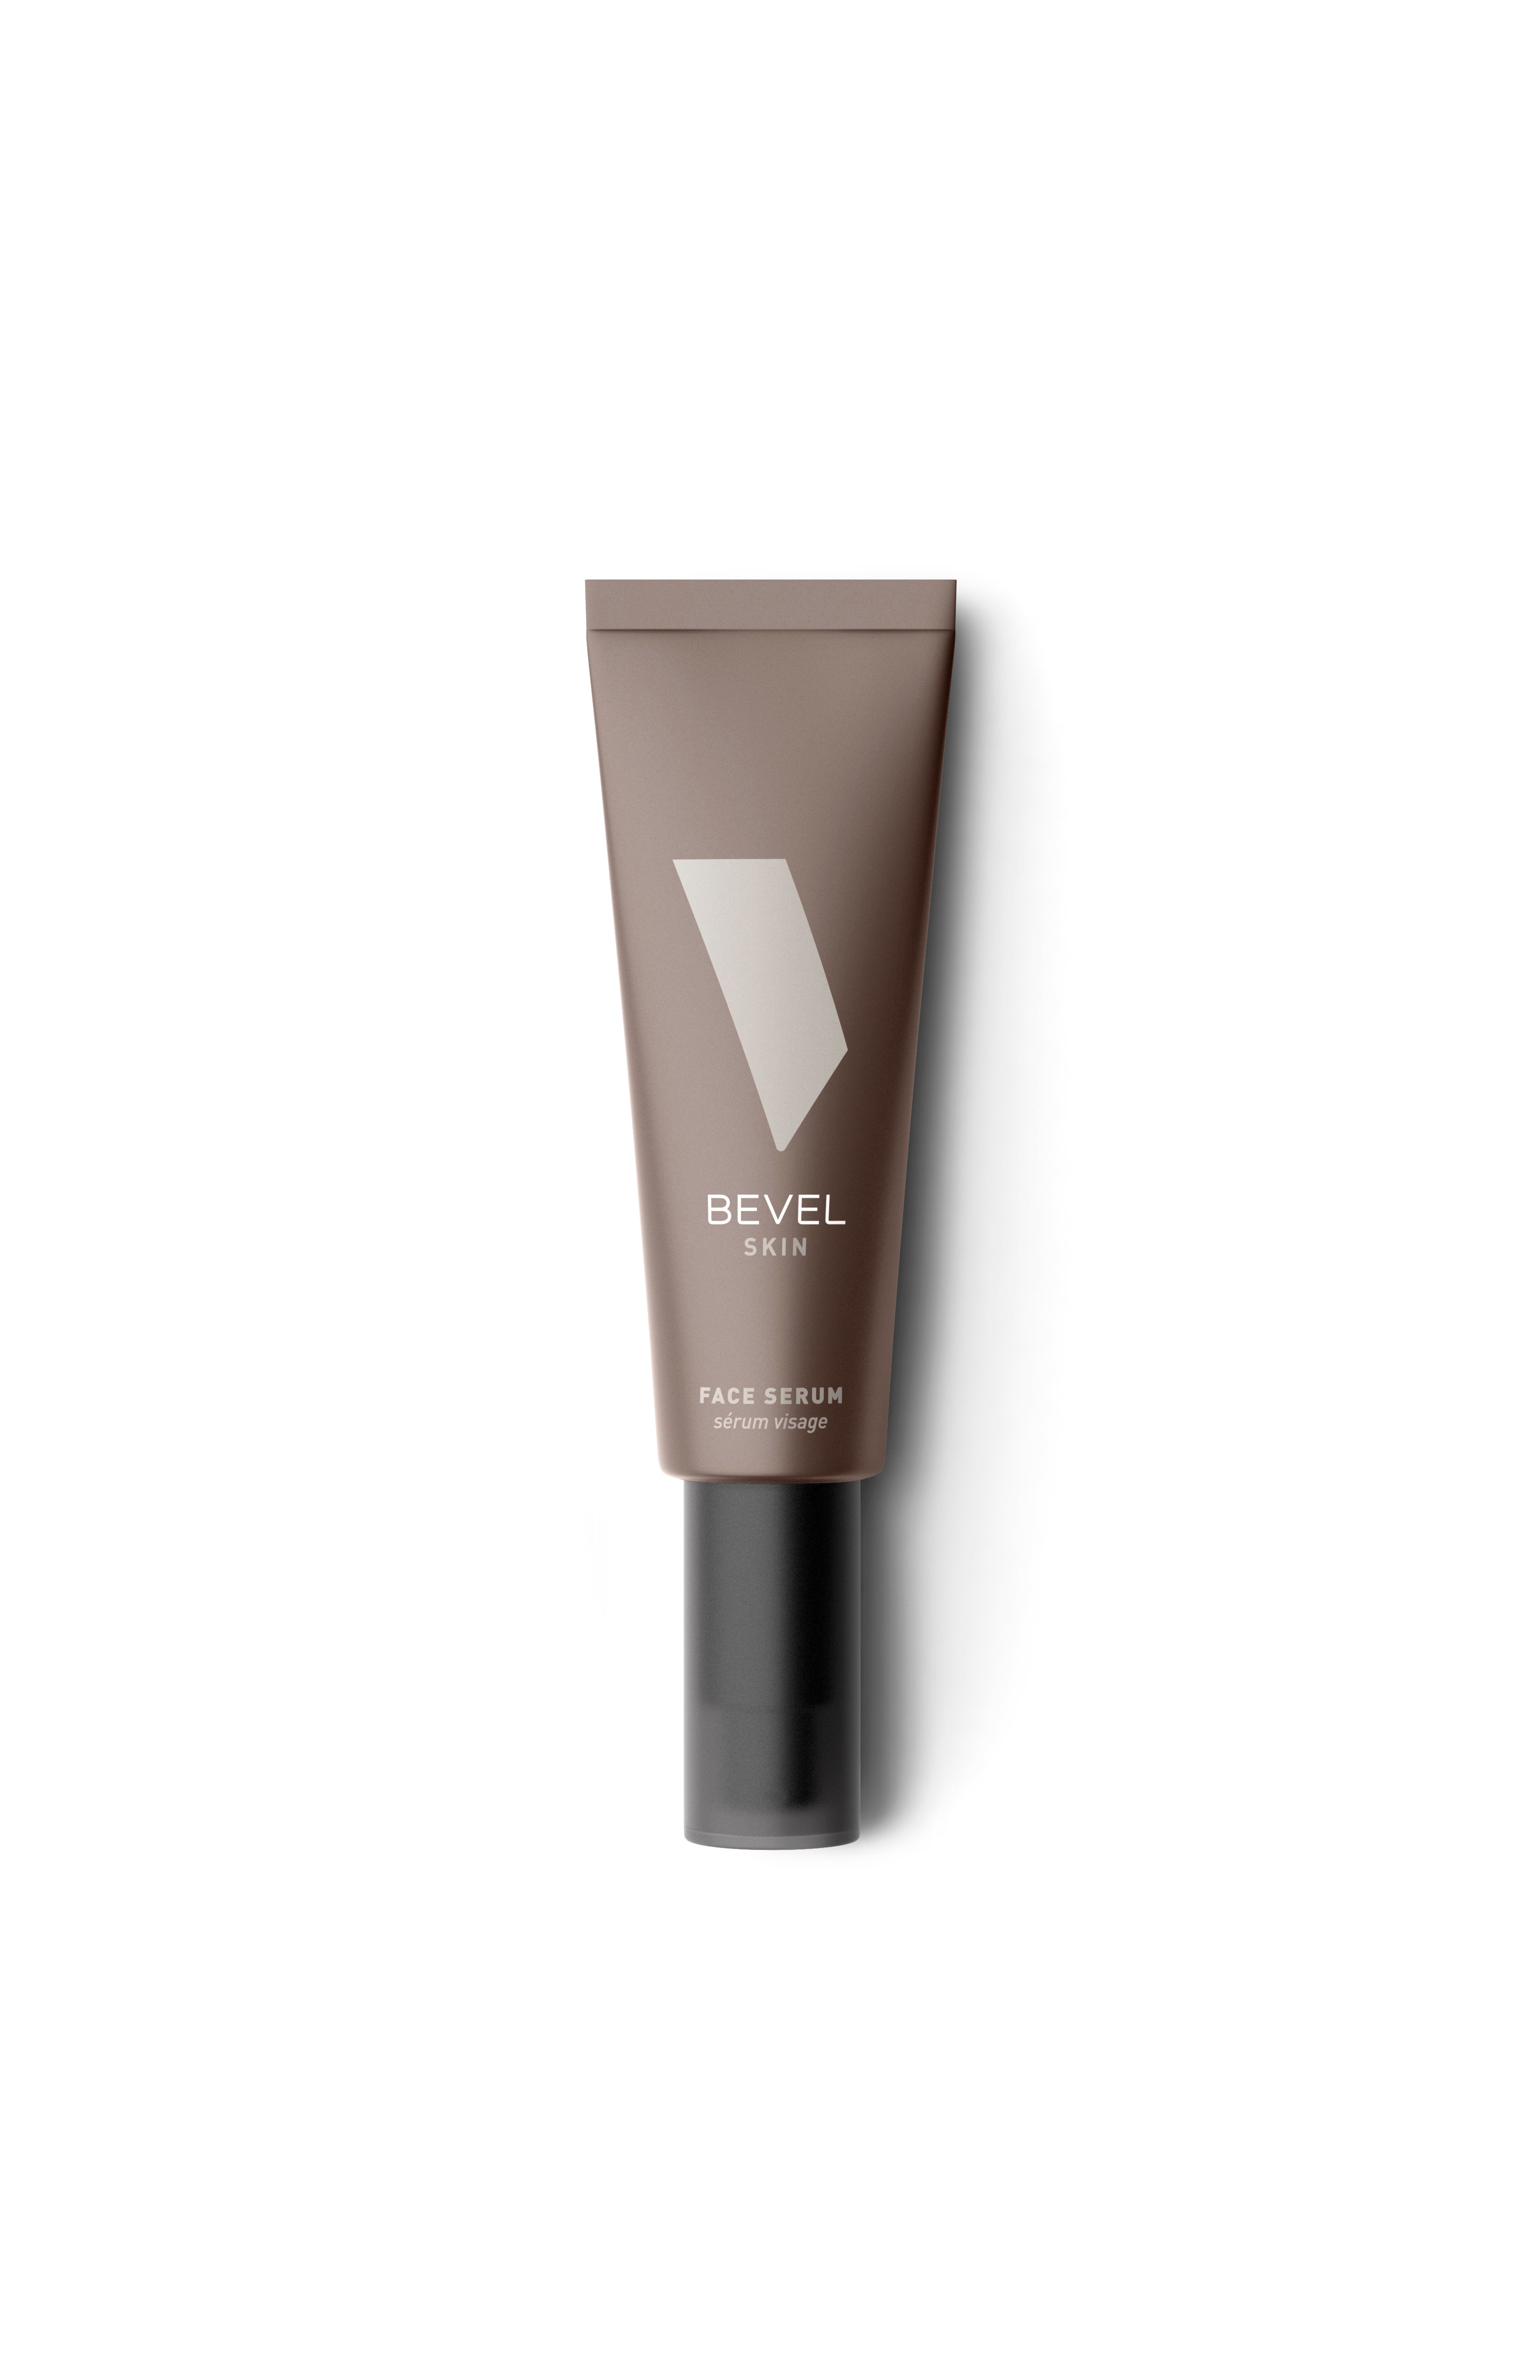 Bevel Launches A New Line Of Body, Skin, And Hair Care Products For Men